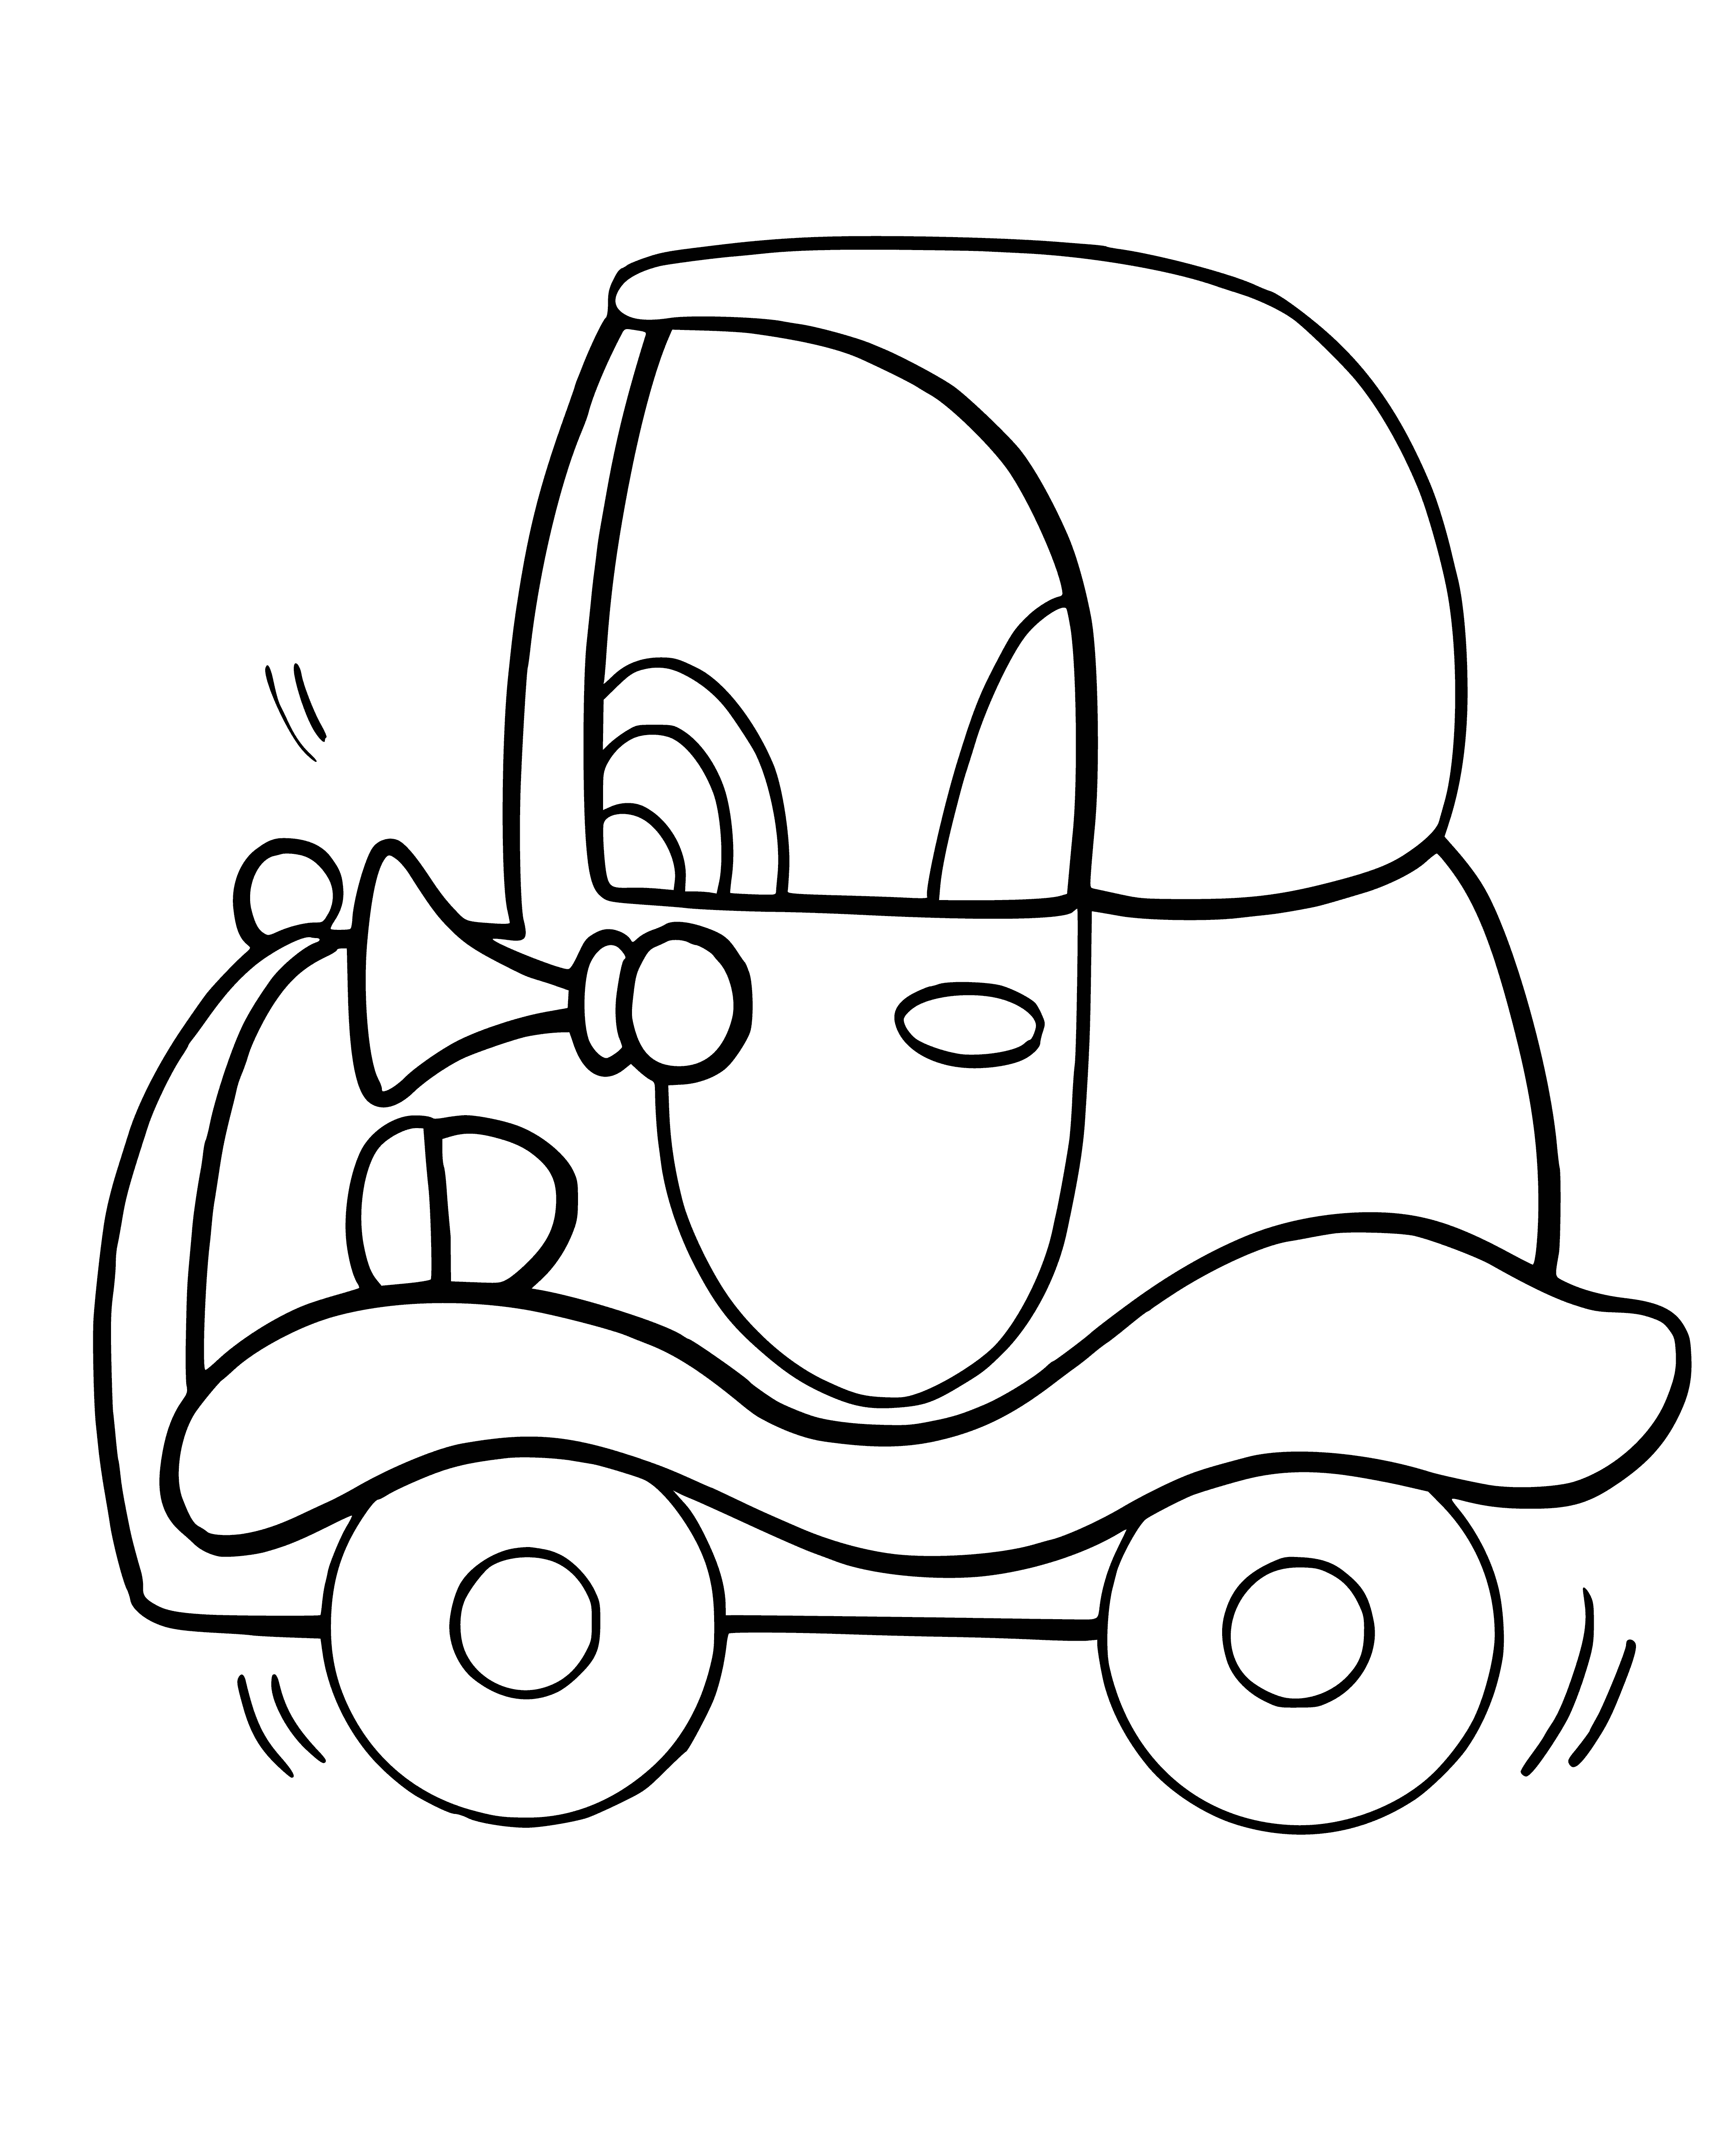 coloring page: Toy car w/ black top on driveway. Four wheels, steering wheel & white line down middle.